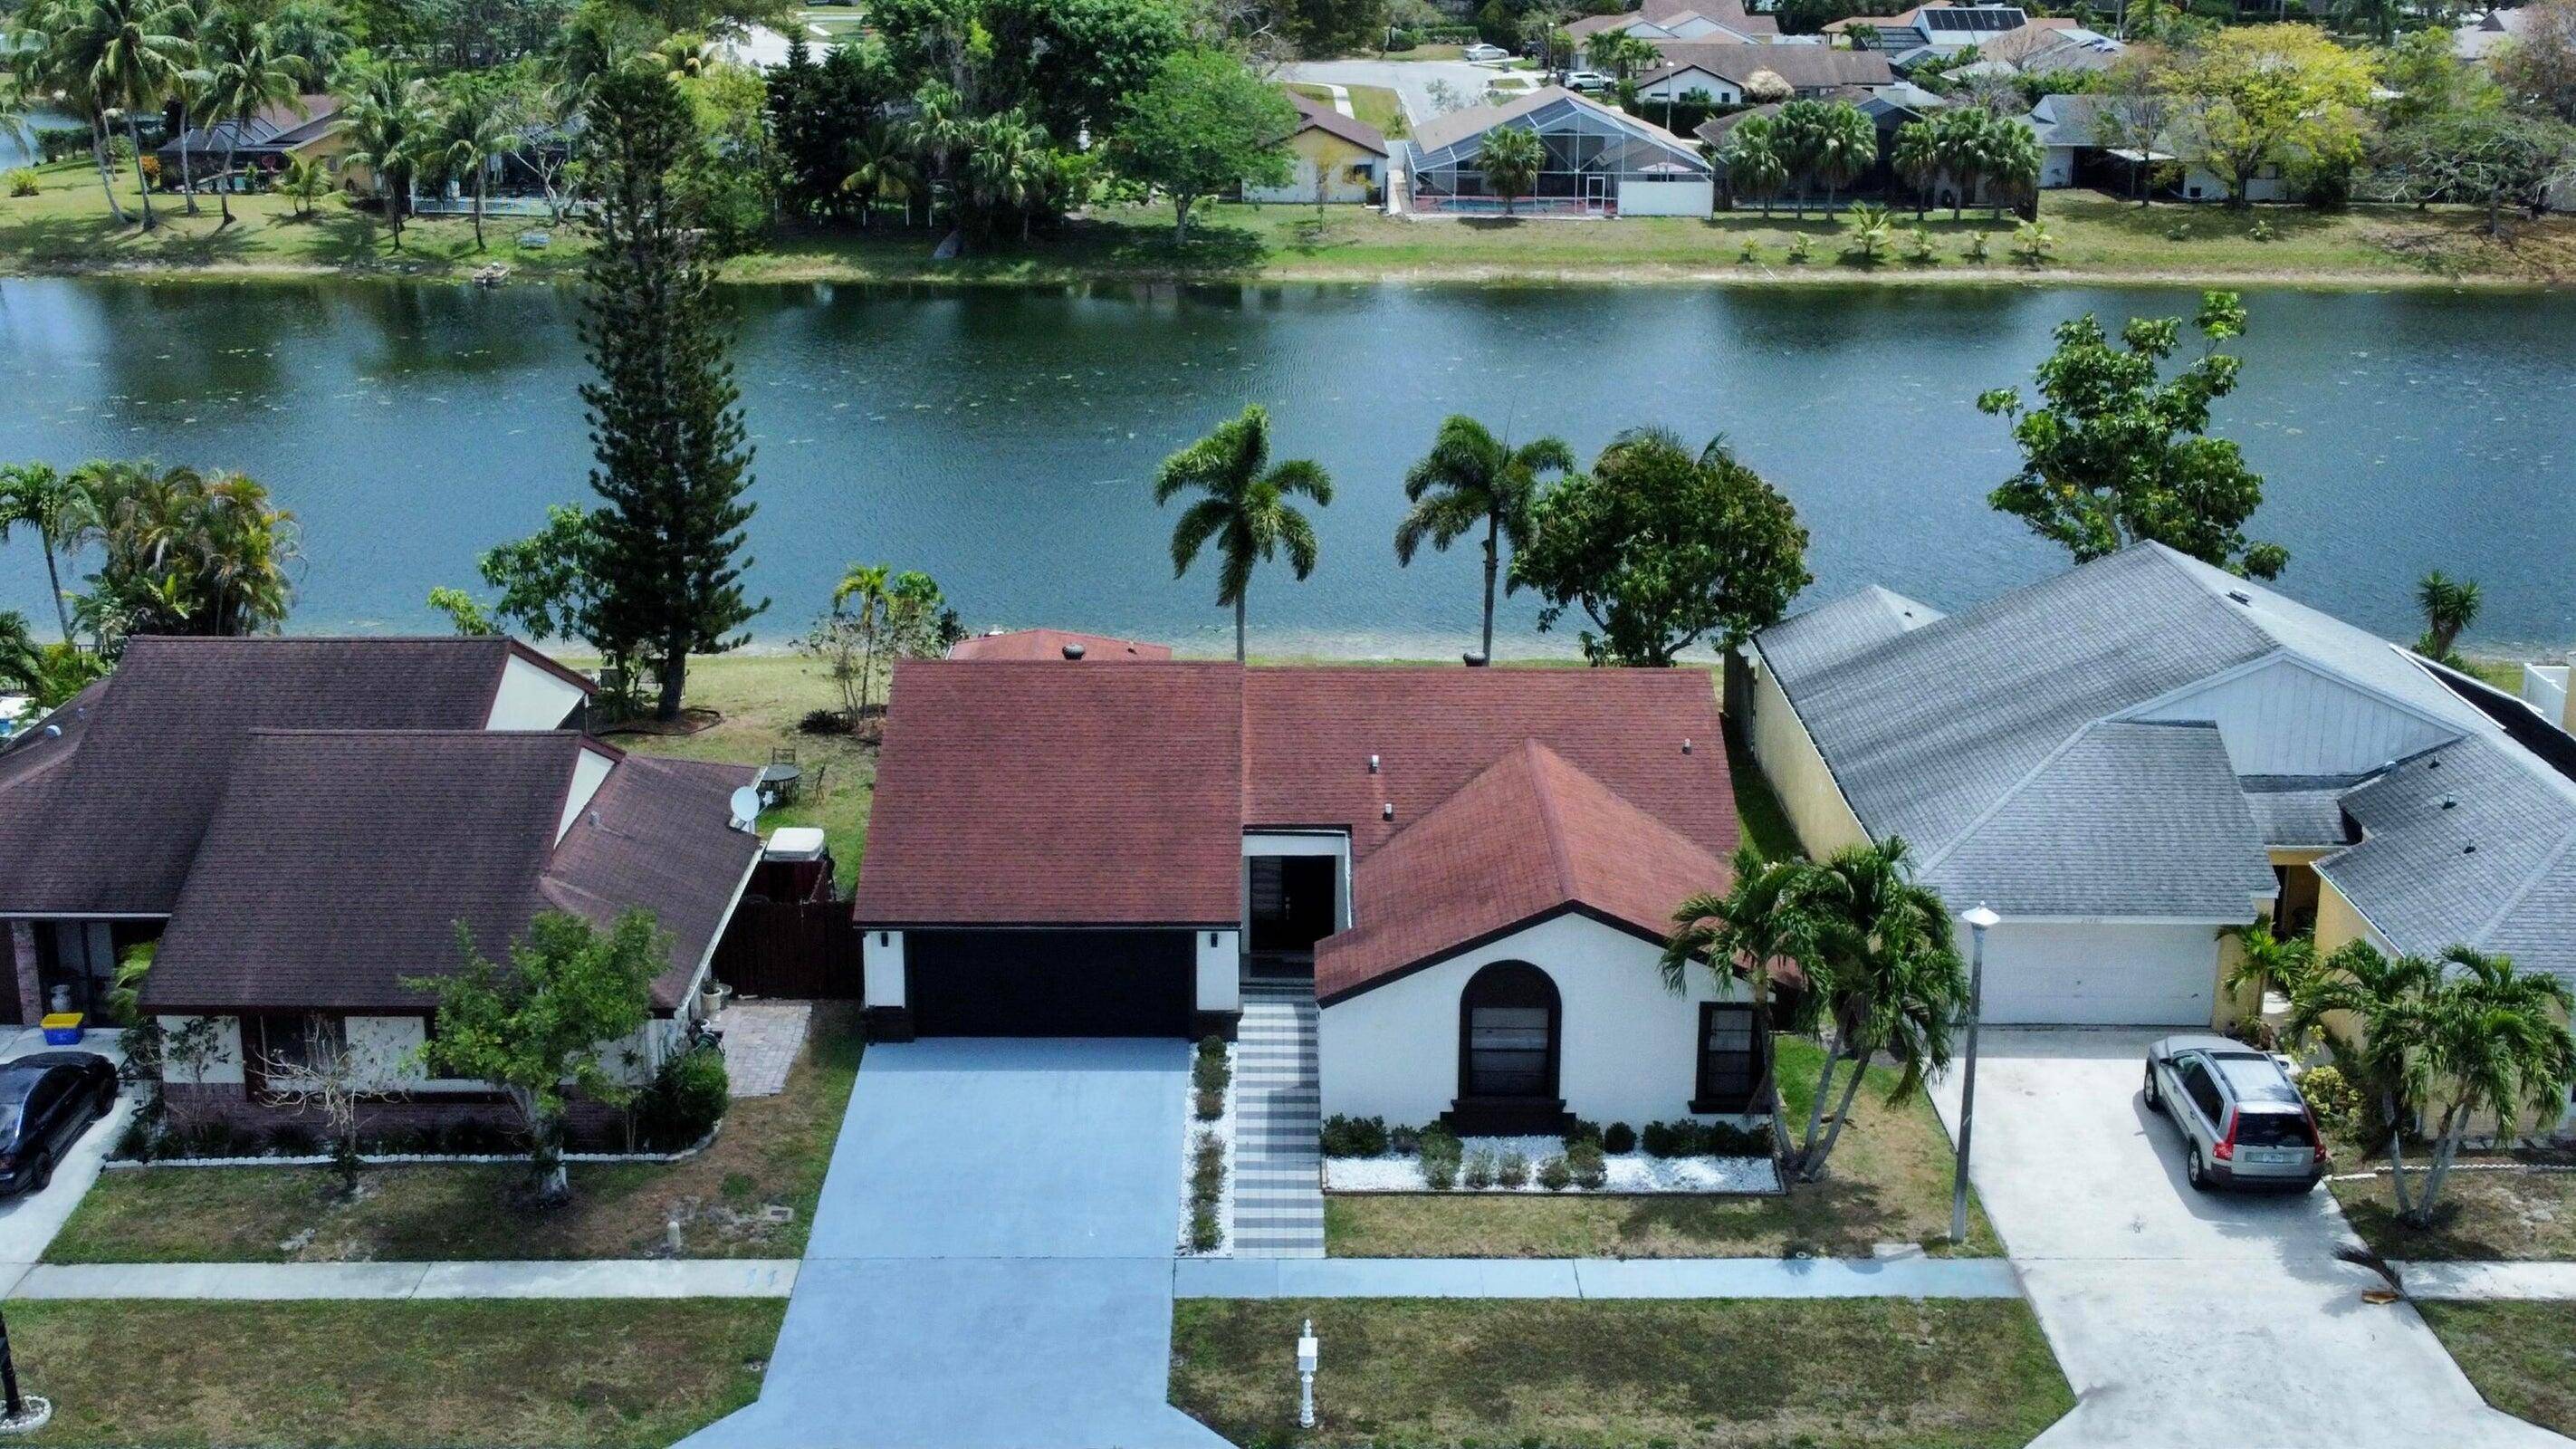 Lake view beautiful, 3 bedroom, 2 bath home with attached 2 car garage that offers extra storage.